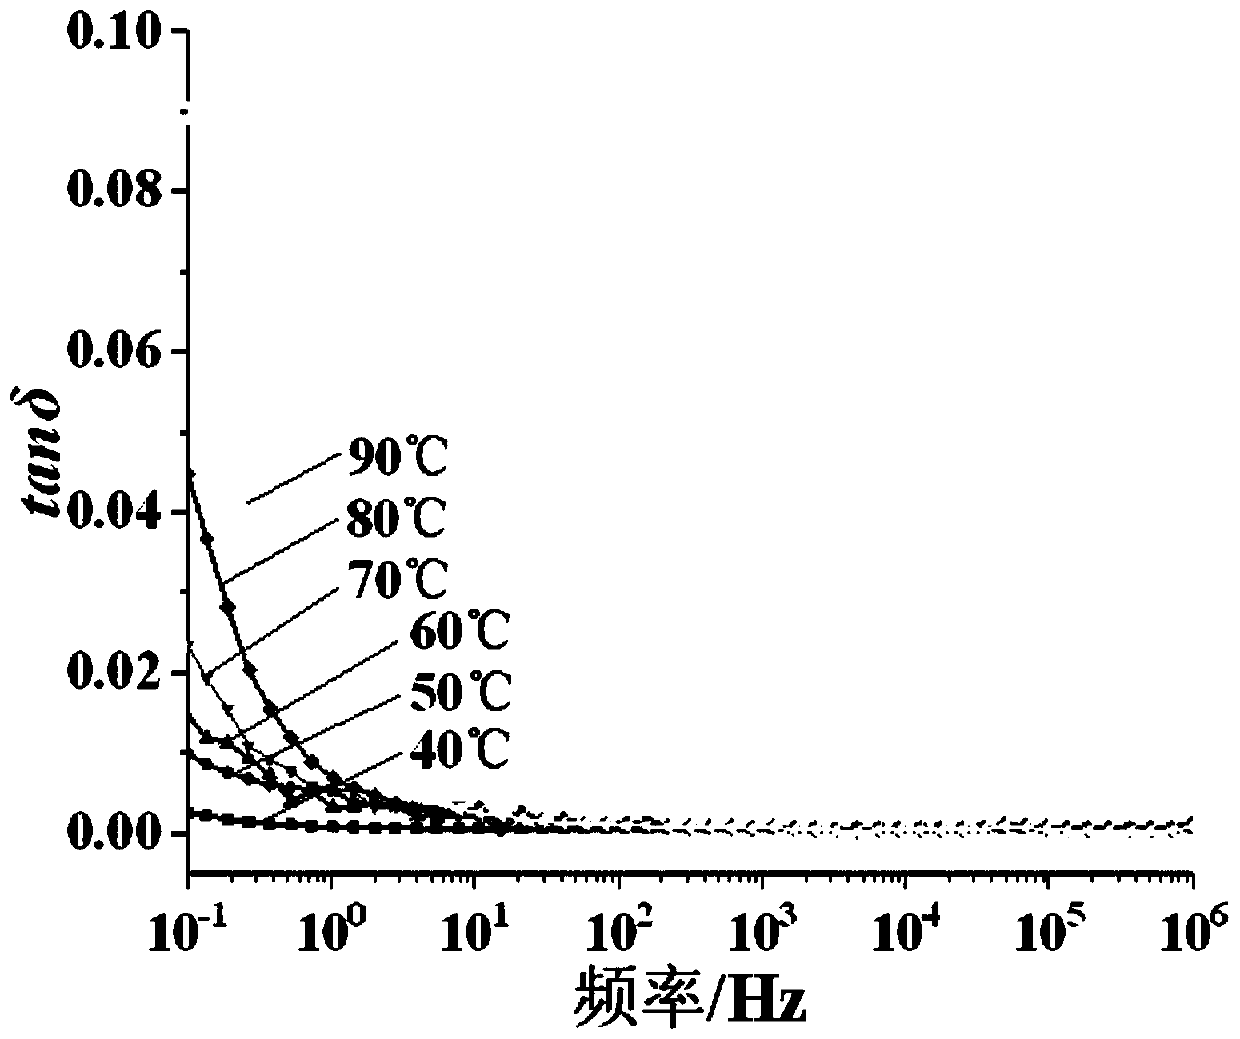 Power cable intermediate joint insulation detection method based on dielectric spectrum method